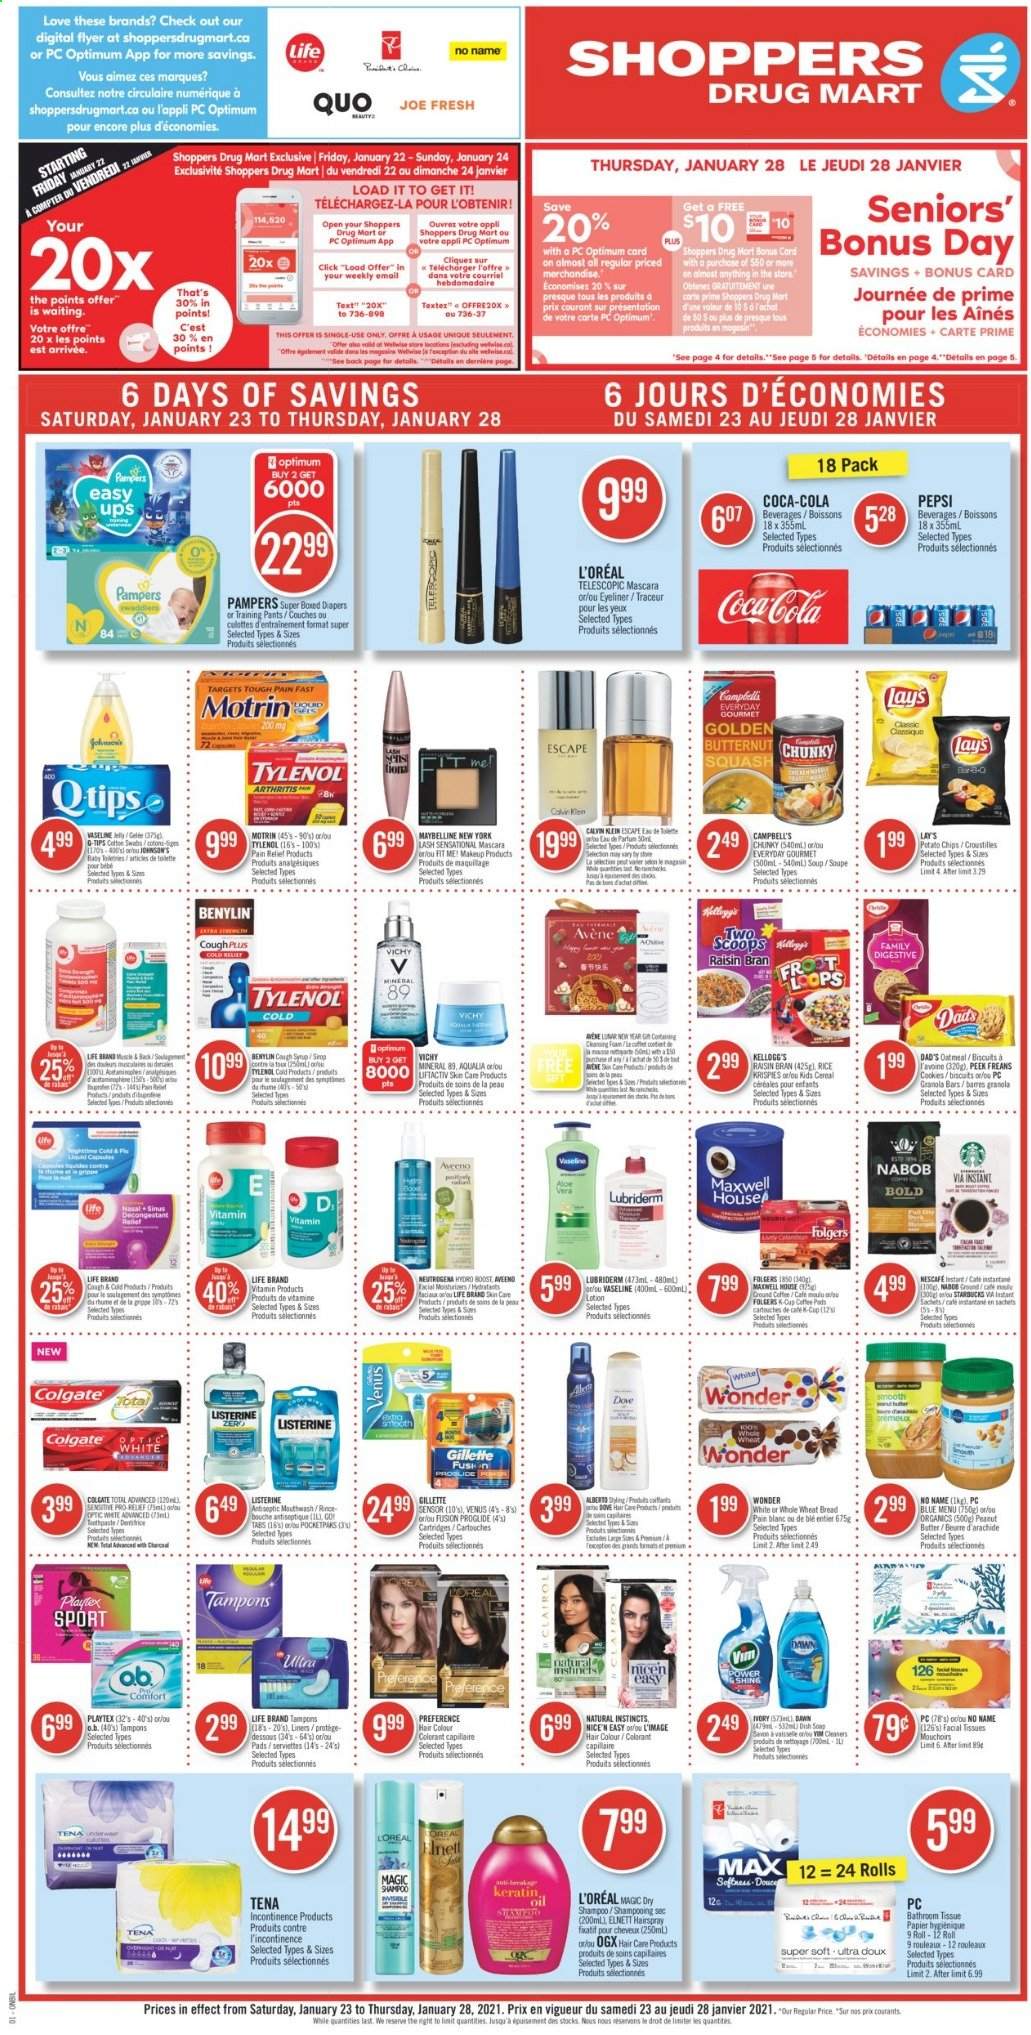 thumbnail - Shoppers Drug Mart Flyer - January 23, 2021 - January 28, 2021 - Sales products - Kellogg's, biscuit, Digestive, potato chips, Lay’s, oatmeal, soup, cereals, granola bar, Rice Krispies, Raisin Bran, Campbell's, oil, Coca-Cola, Pepsi, Boost, Maxwell House, Folgers, Starbucks, pants, nappies, Johnson's, baby pants, Aveeno, bath tissue, Vichy, Vaseline, Playtex, tampons, facial tissues, L’Oréal, moisturizer, OGX, hair color, keratin, body lotion, Lubriderm, Venus, makeup, eyeliner, pain relief, Tylenol, Go!, Benylin, Motrin, Gillette, Listerine, mascara, Maybelline, Neutrogena, shampoo, Pampers, chips, Nescafé. Page 1.